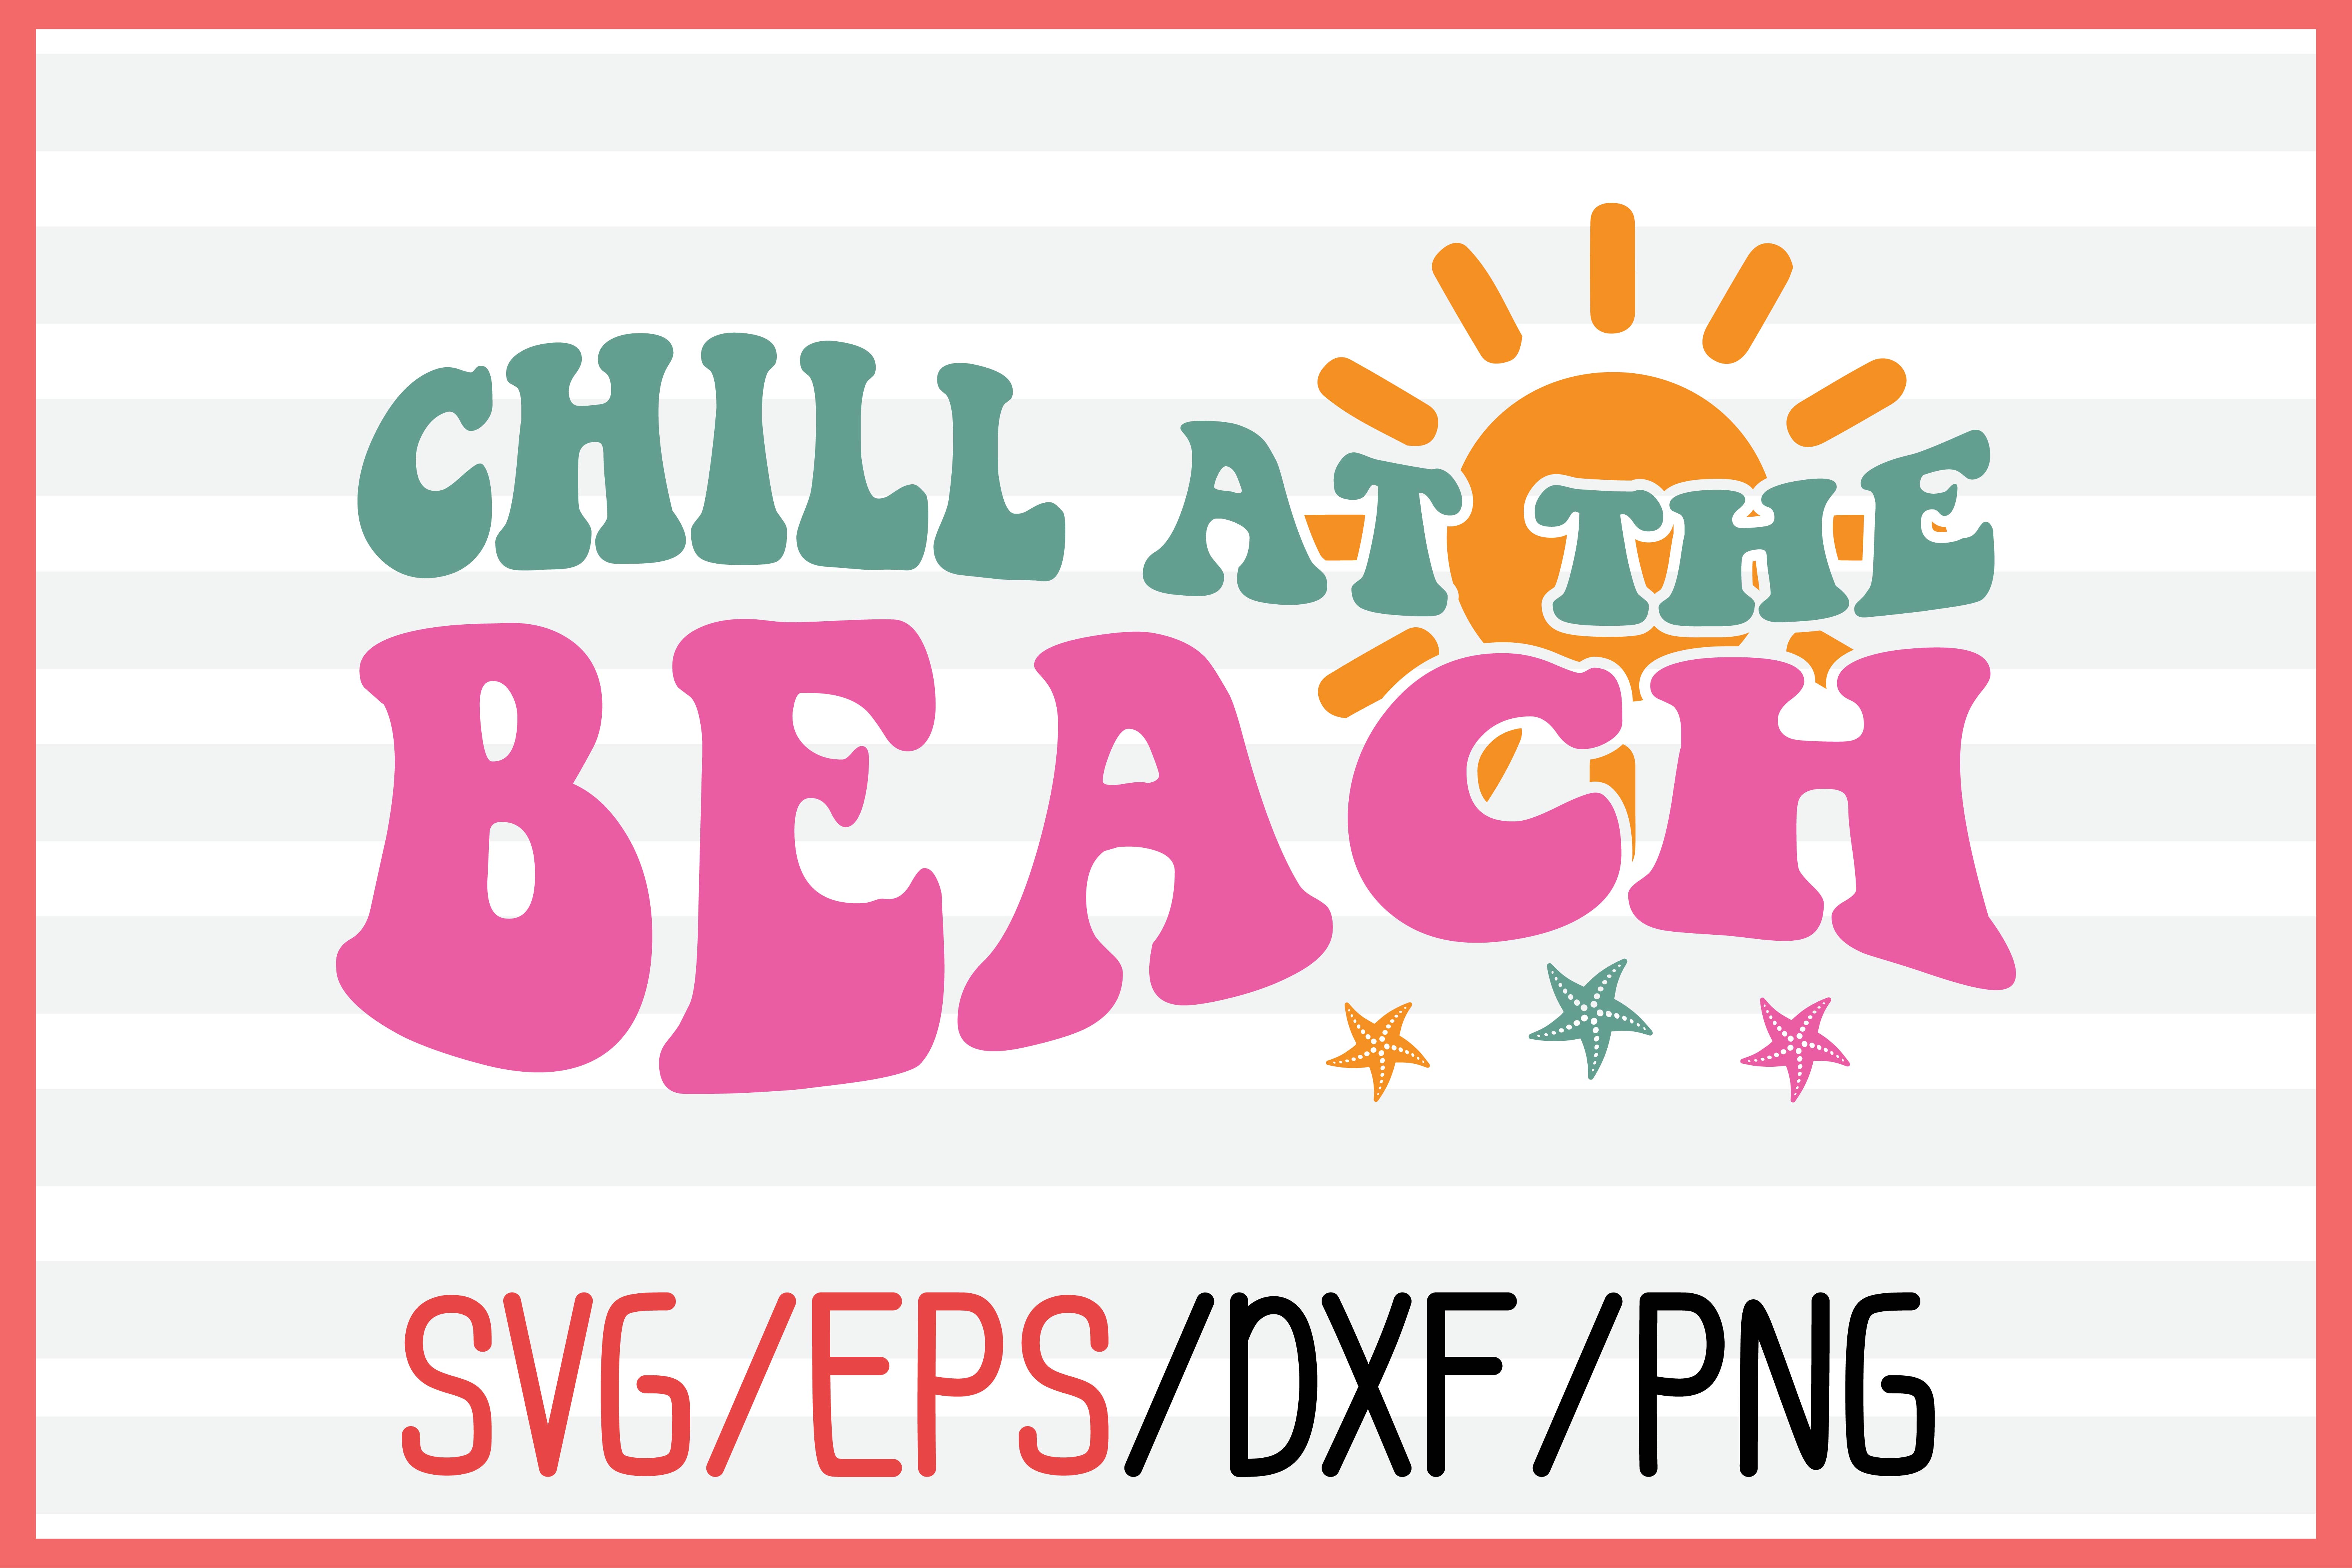 About Chill at the beach Retro svg design pinterest preview image.